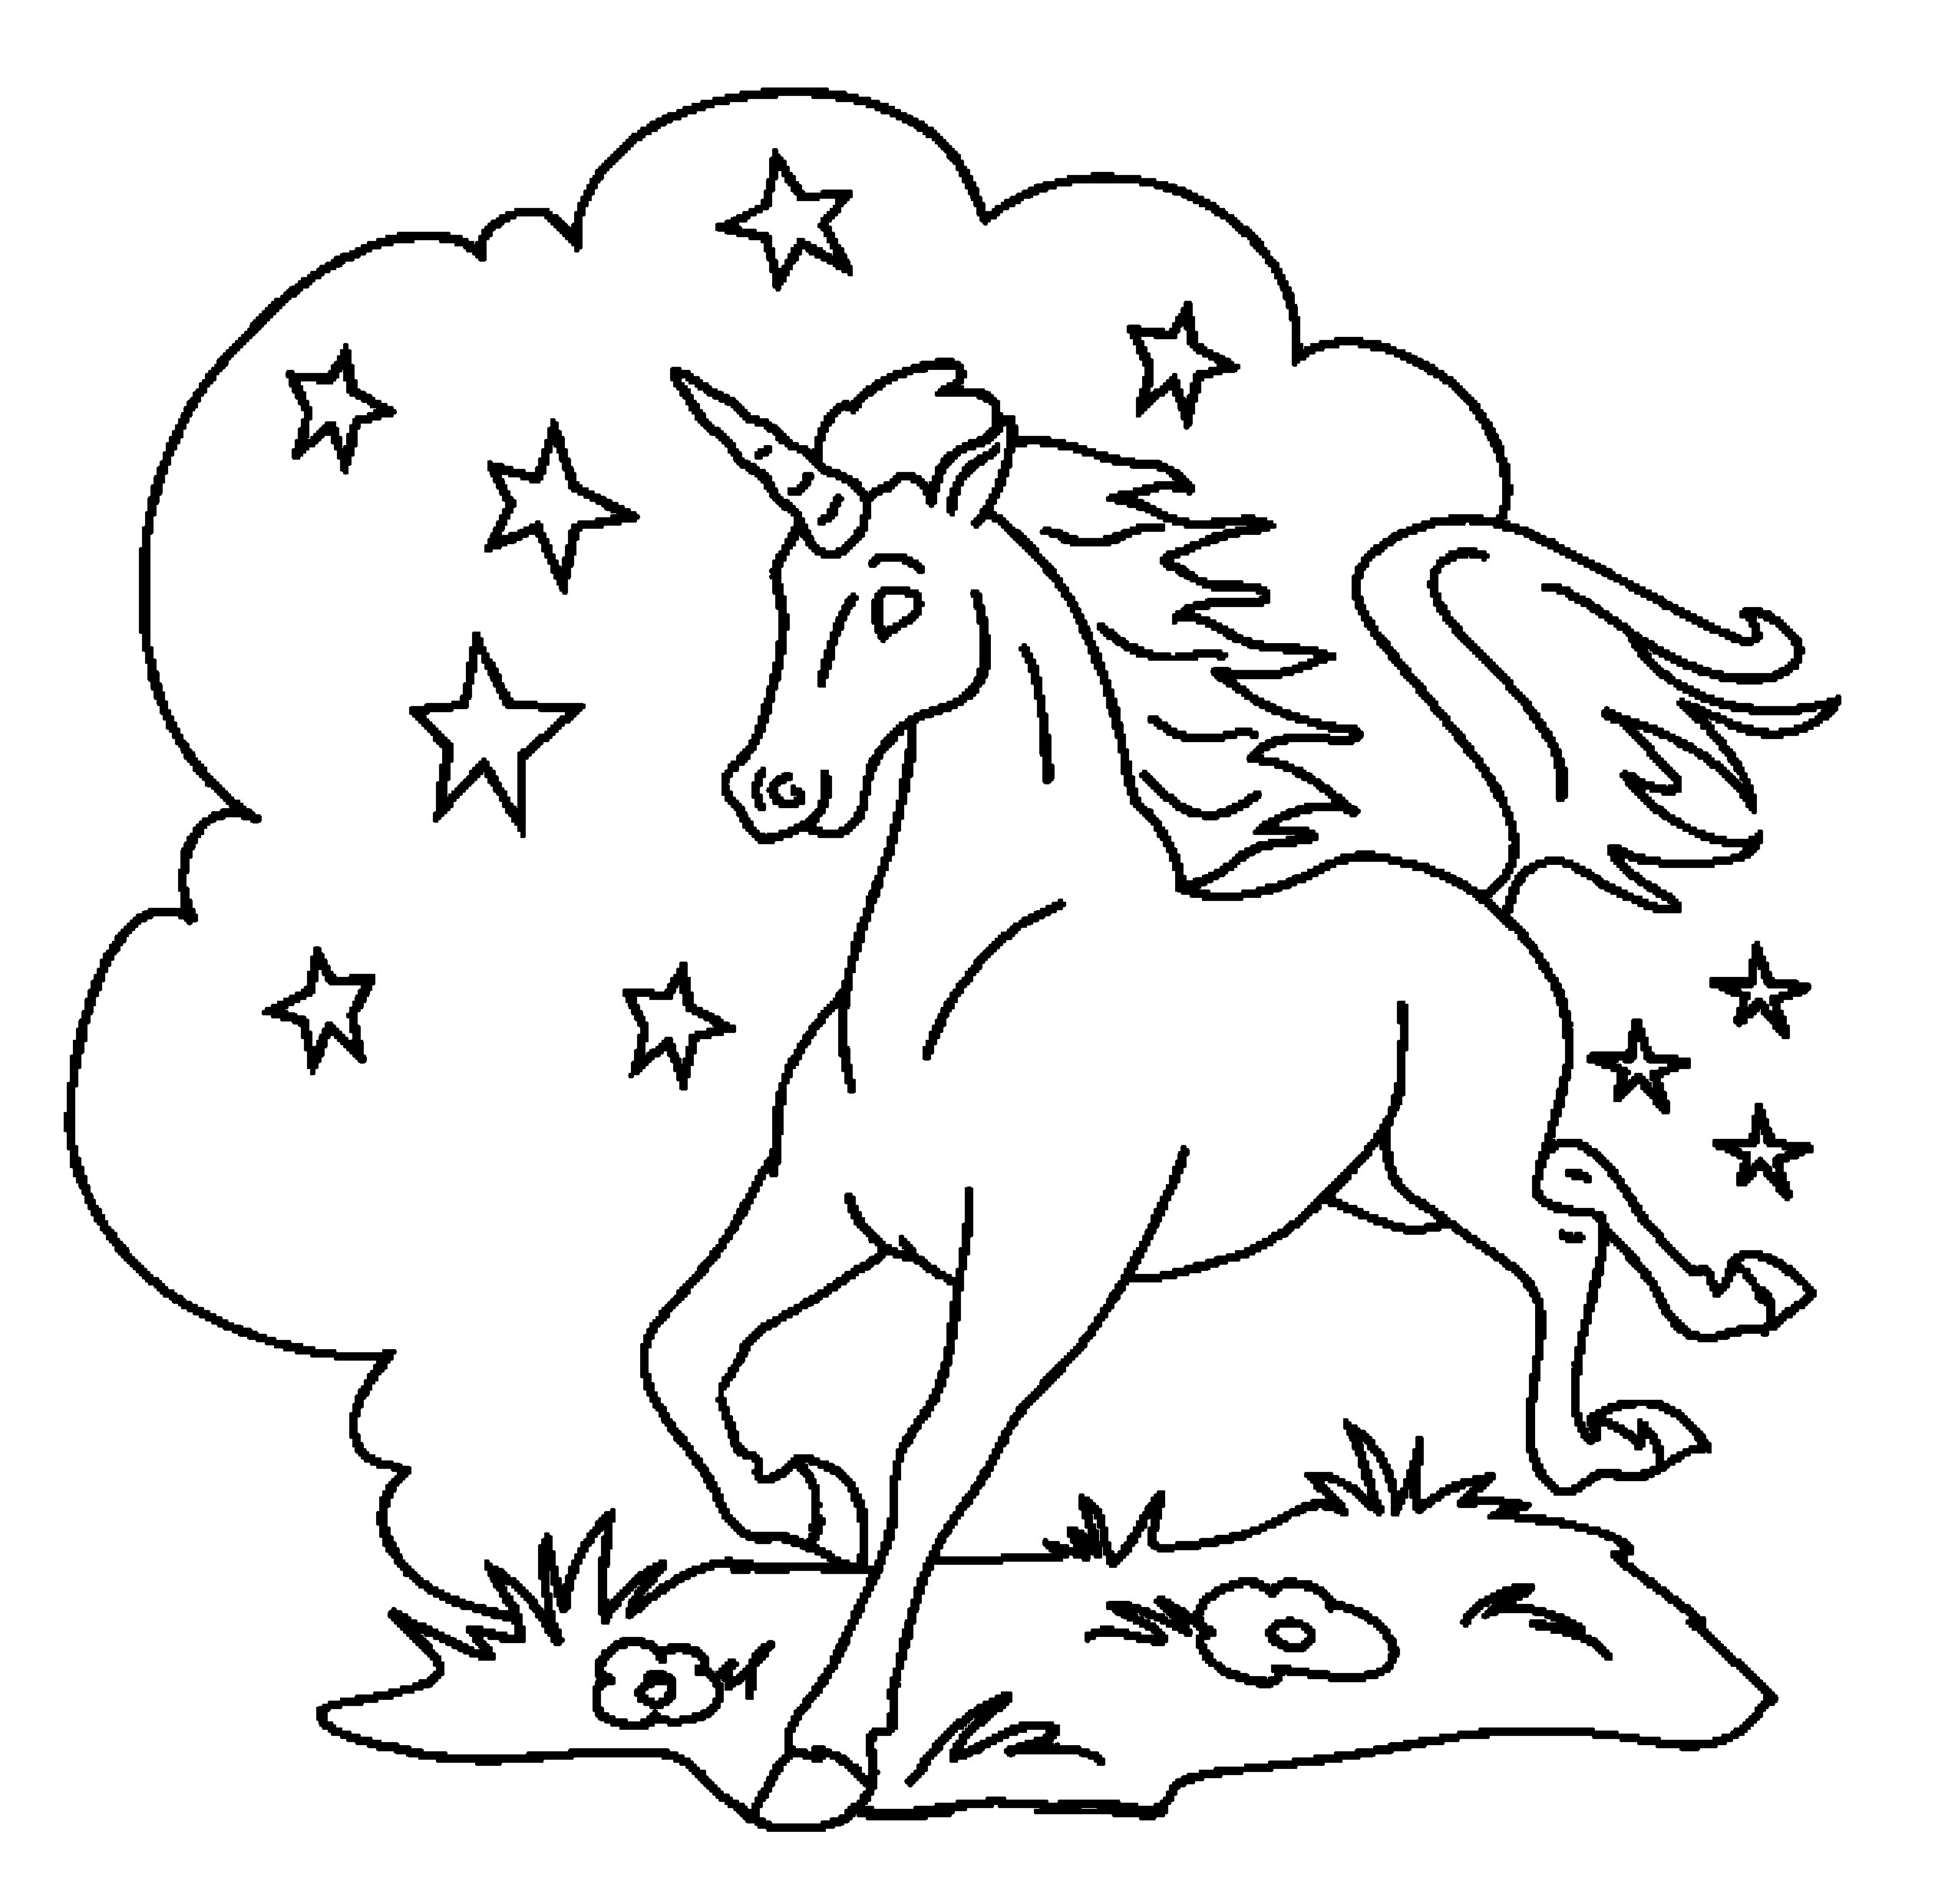 Coloring Pages For Kids Unicorn
 Print & Download Unicorn Coloring Pages for Children